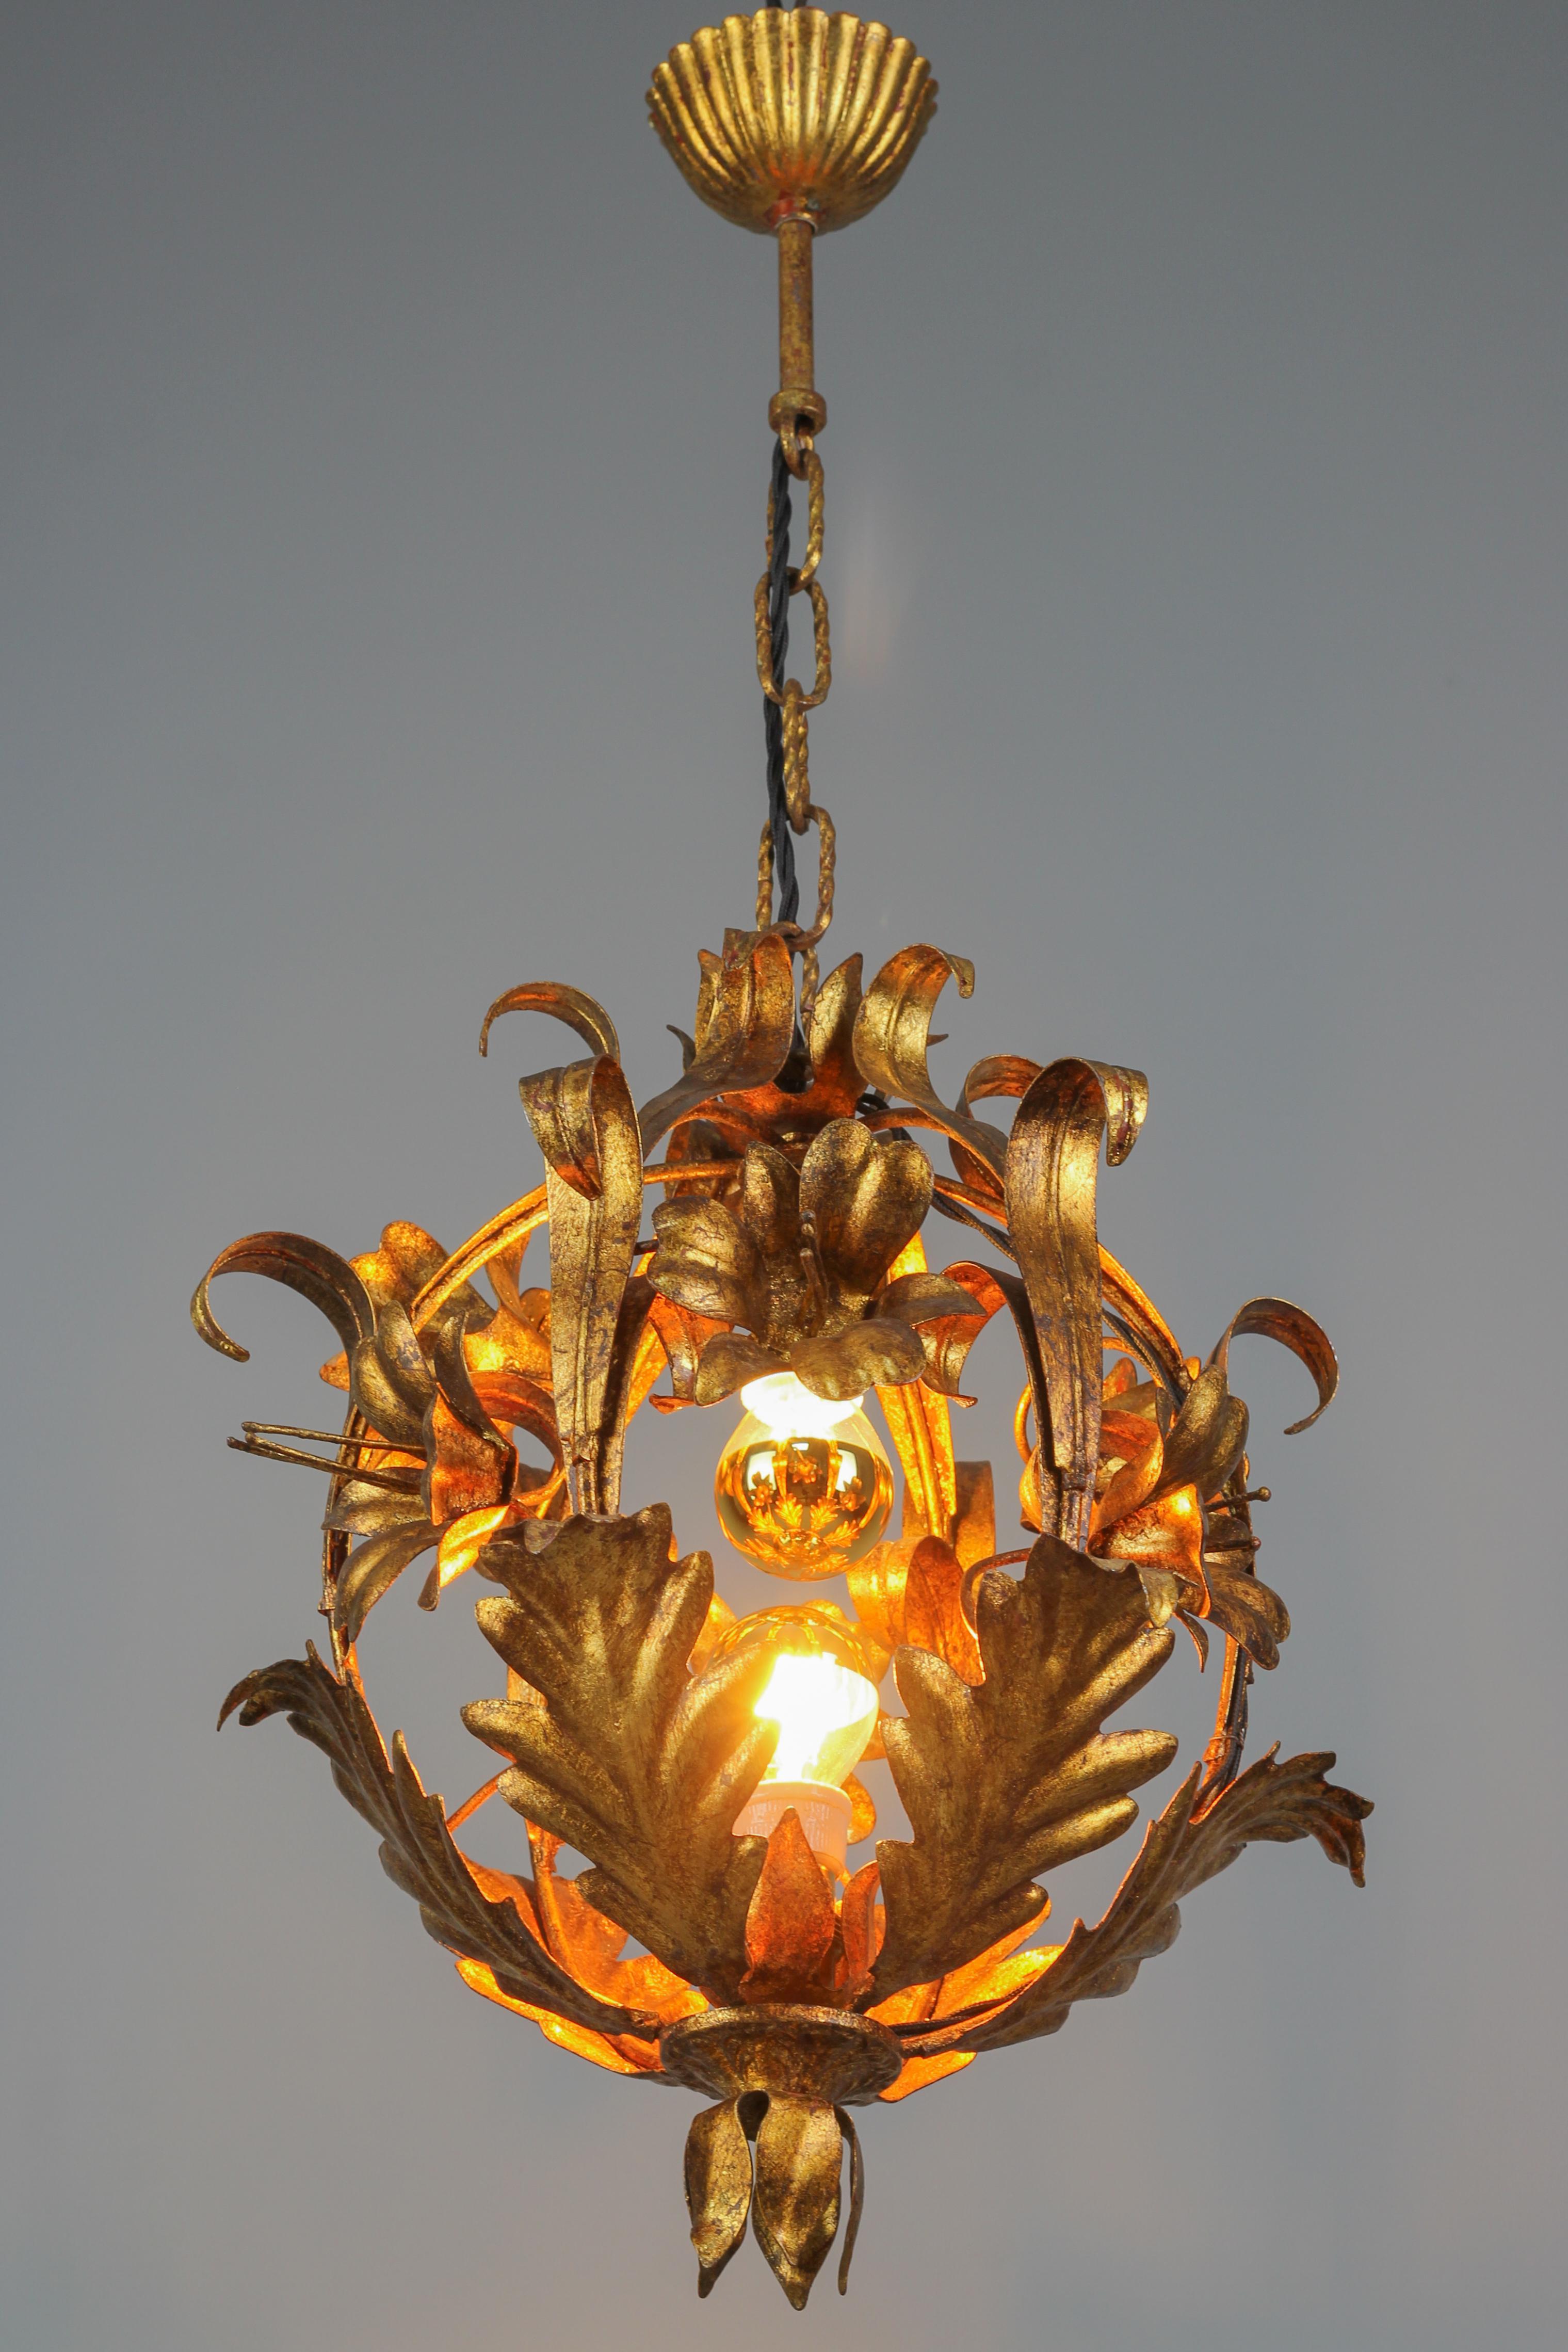 Beautiful and very unusually, circular-shaped, golden tole pendant chandelier. This adorable golden color Hollywood Regency period chandelier is decorated with lily flowers and leaves and has two sockets for E14 size light bulbs.
Italy, circa the